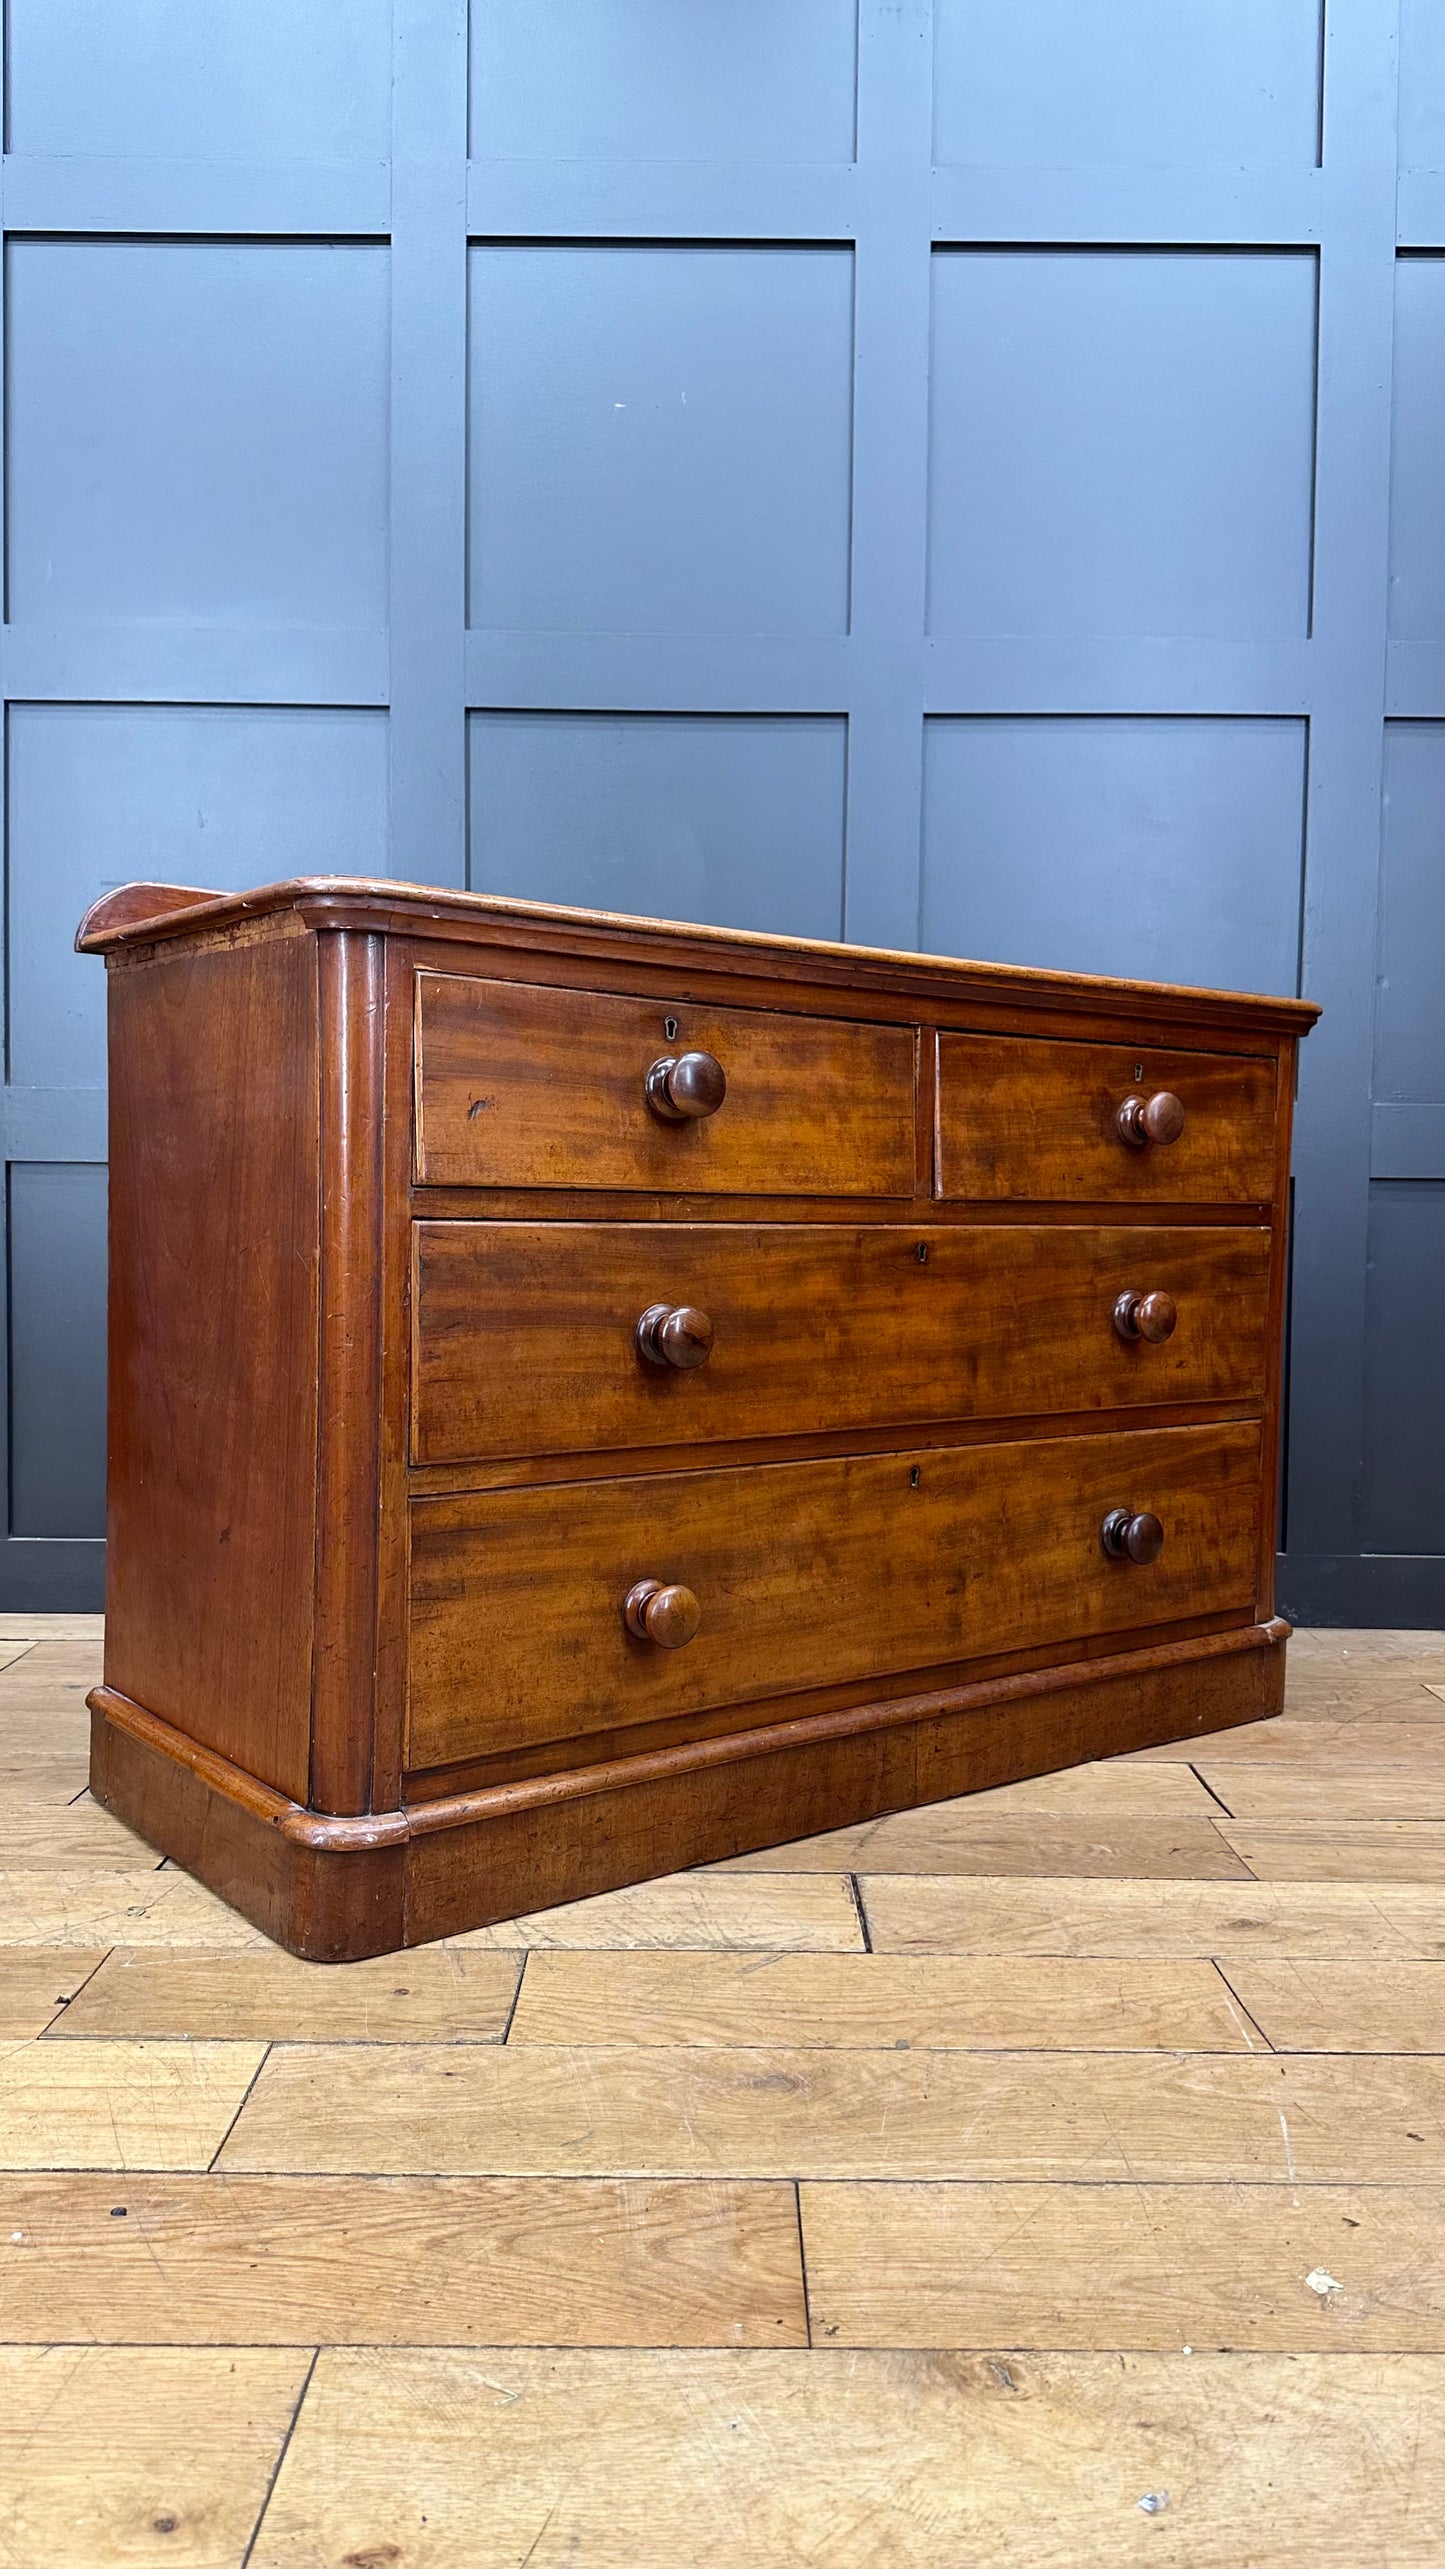 Antique Victorian Mahogany Chest Of Drawers /Bedroom storage / Antique Furniture